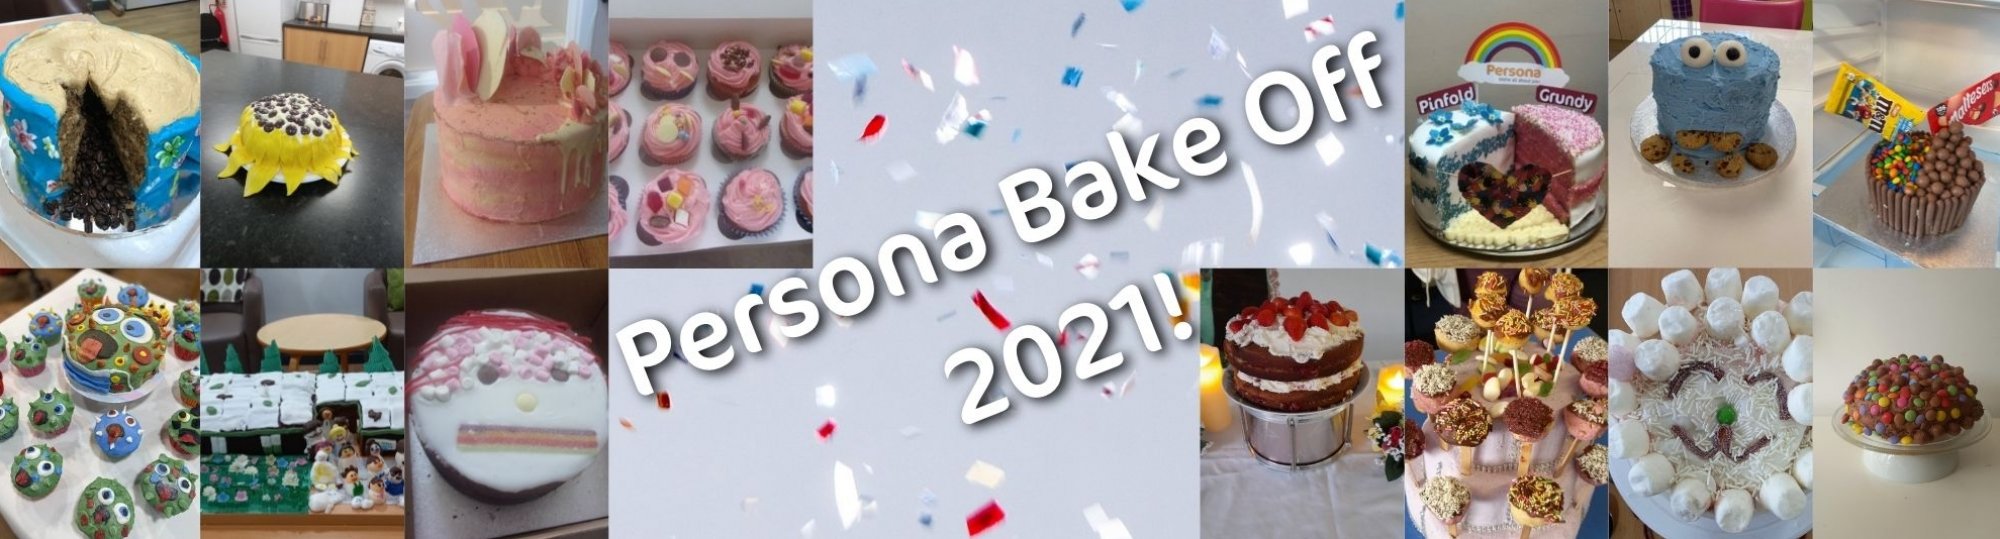 Persona Bake Off 2021